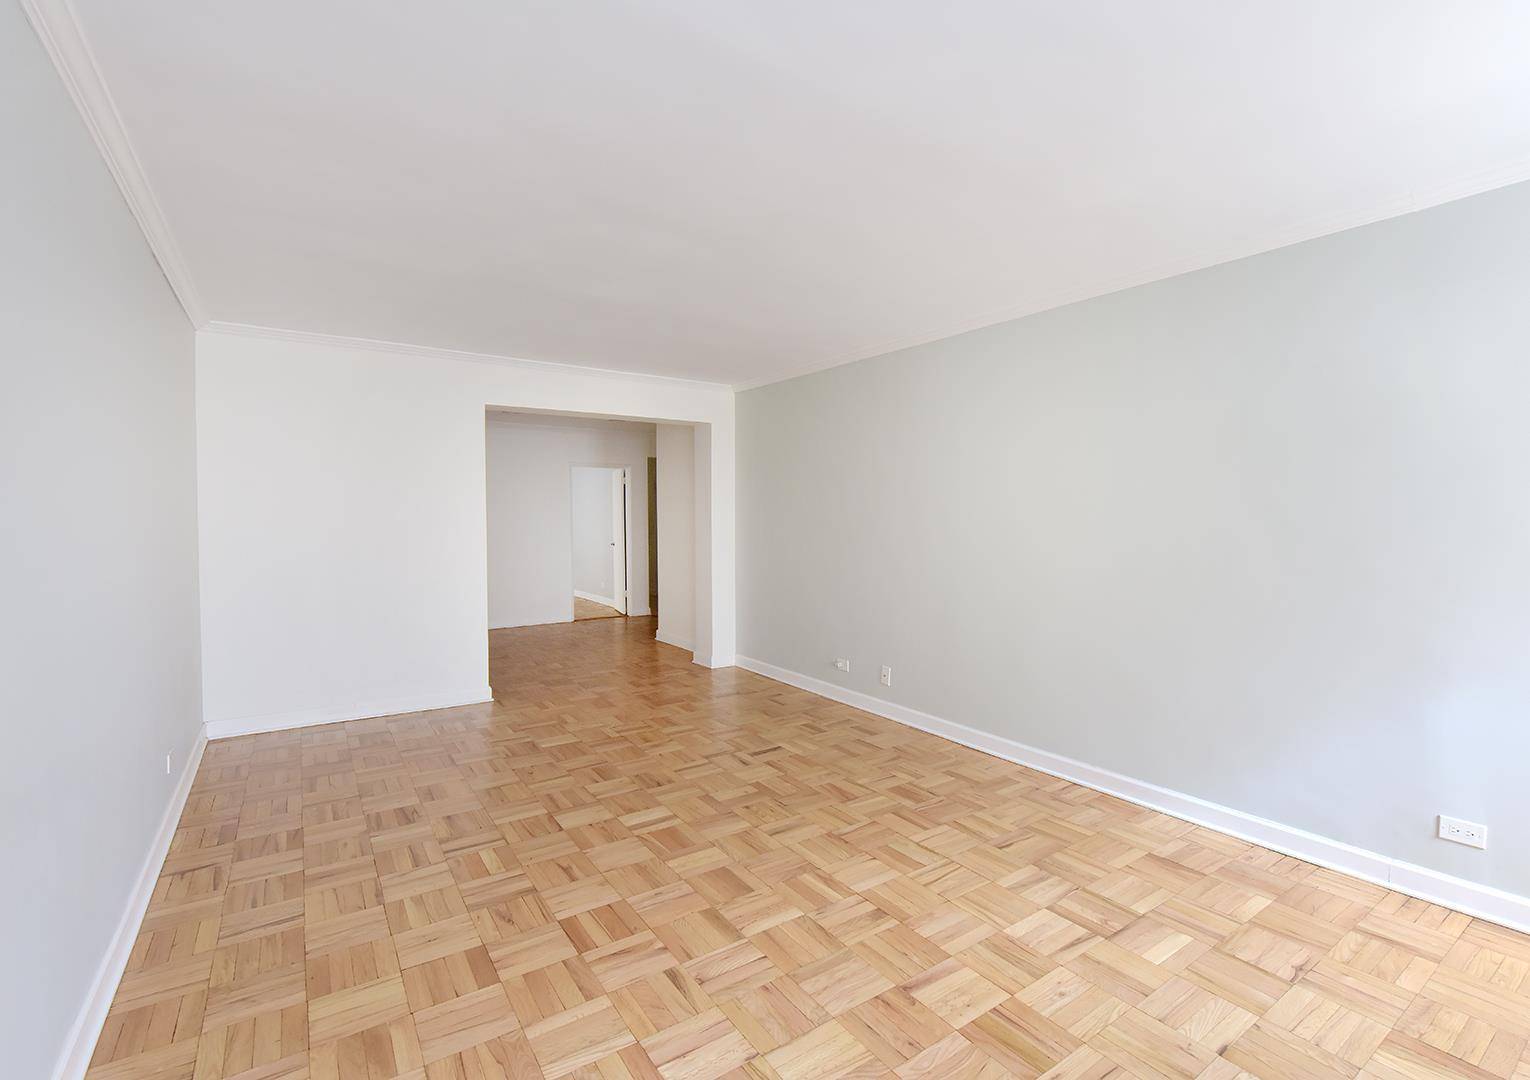 Spacious three bedroom apartment with 1.